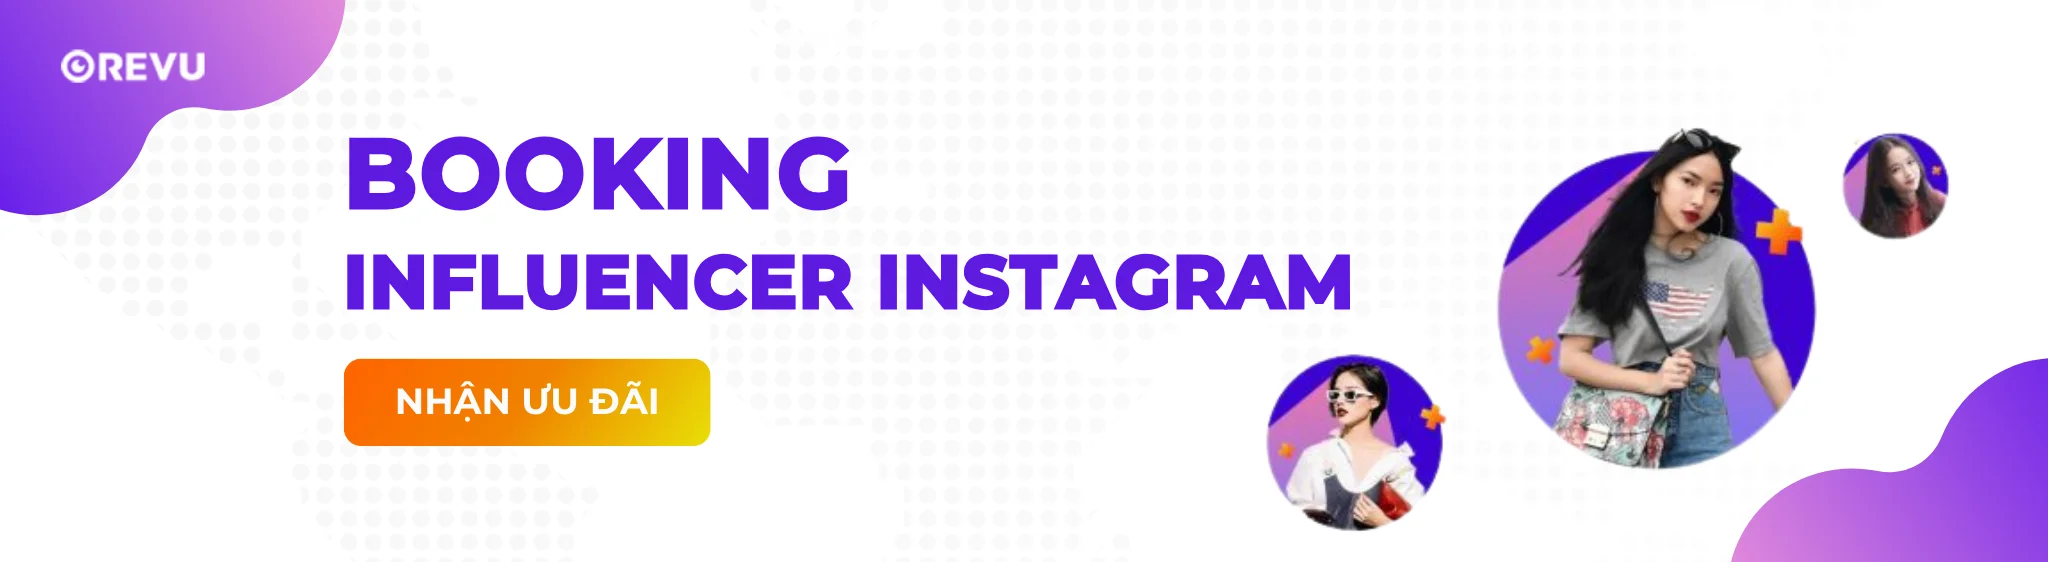 dịch vụ booking INFLUENCER instagram việt nam